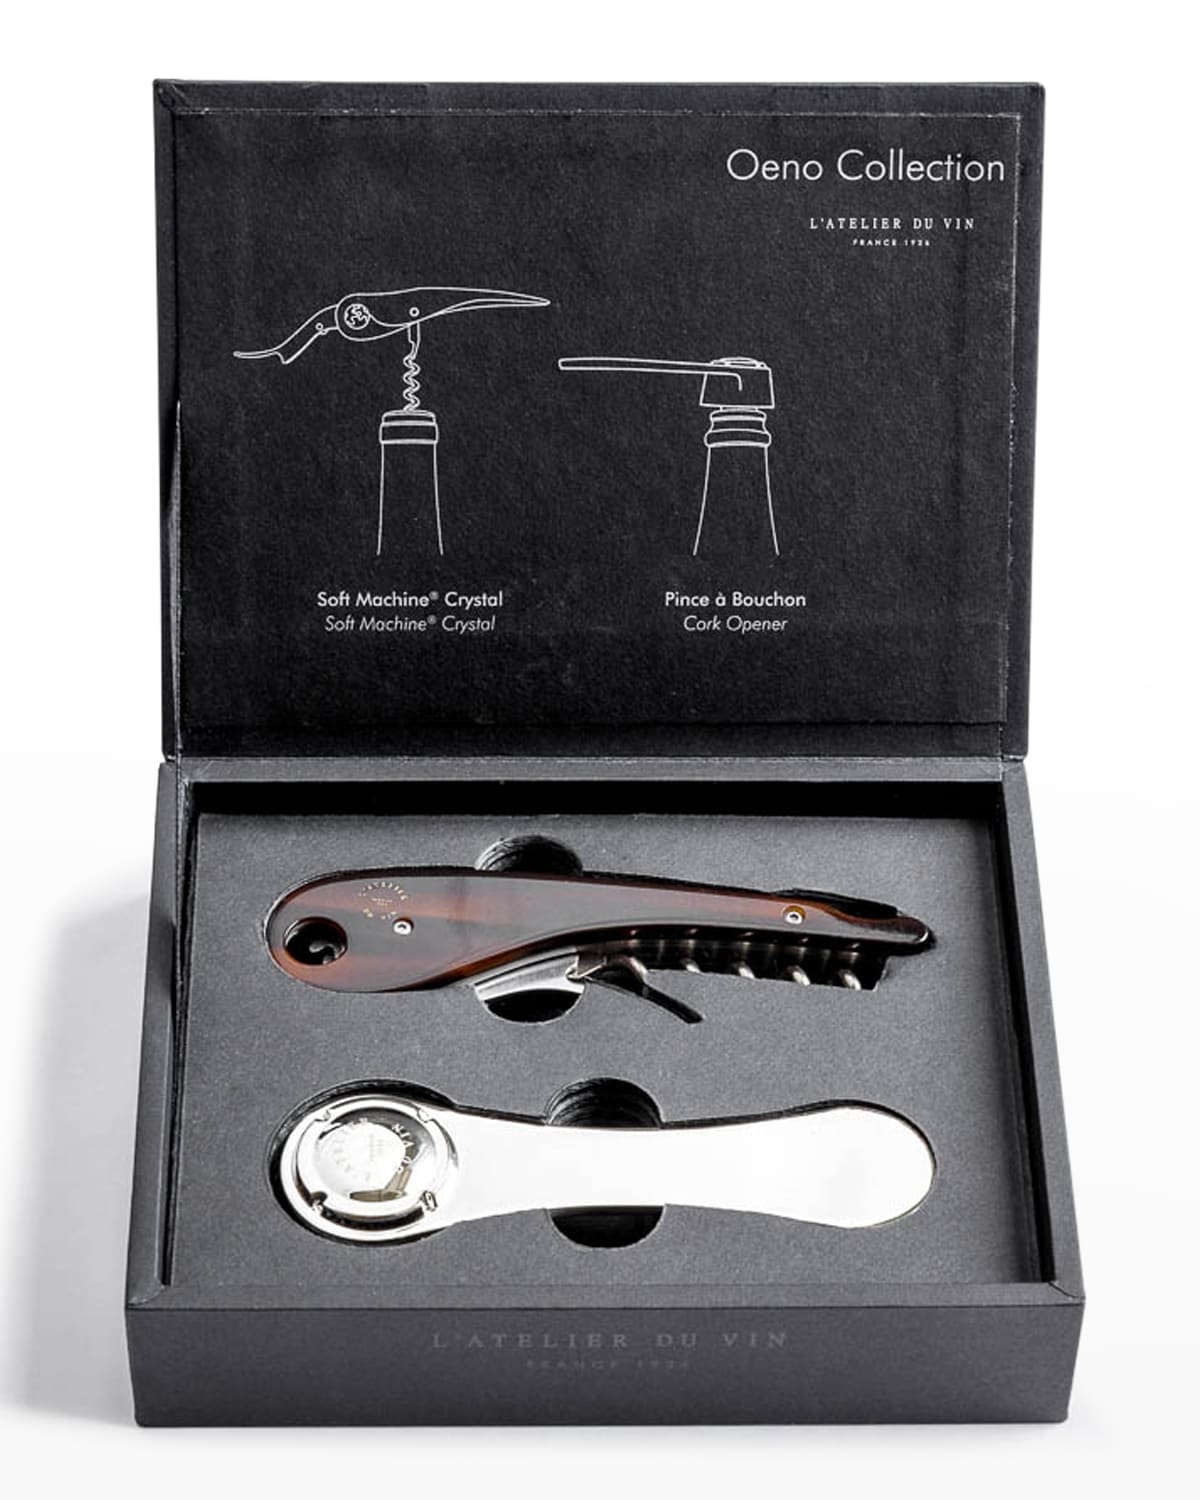 Oeno Collection 4 Wine Tools Gift Box